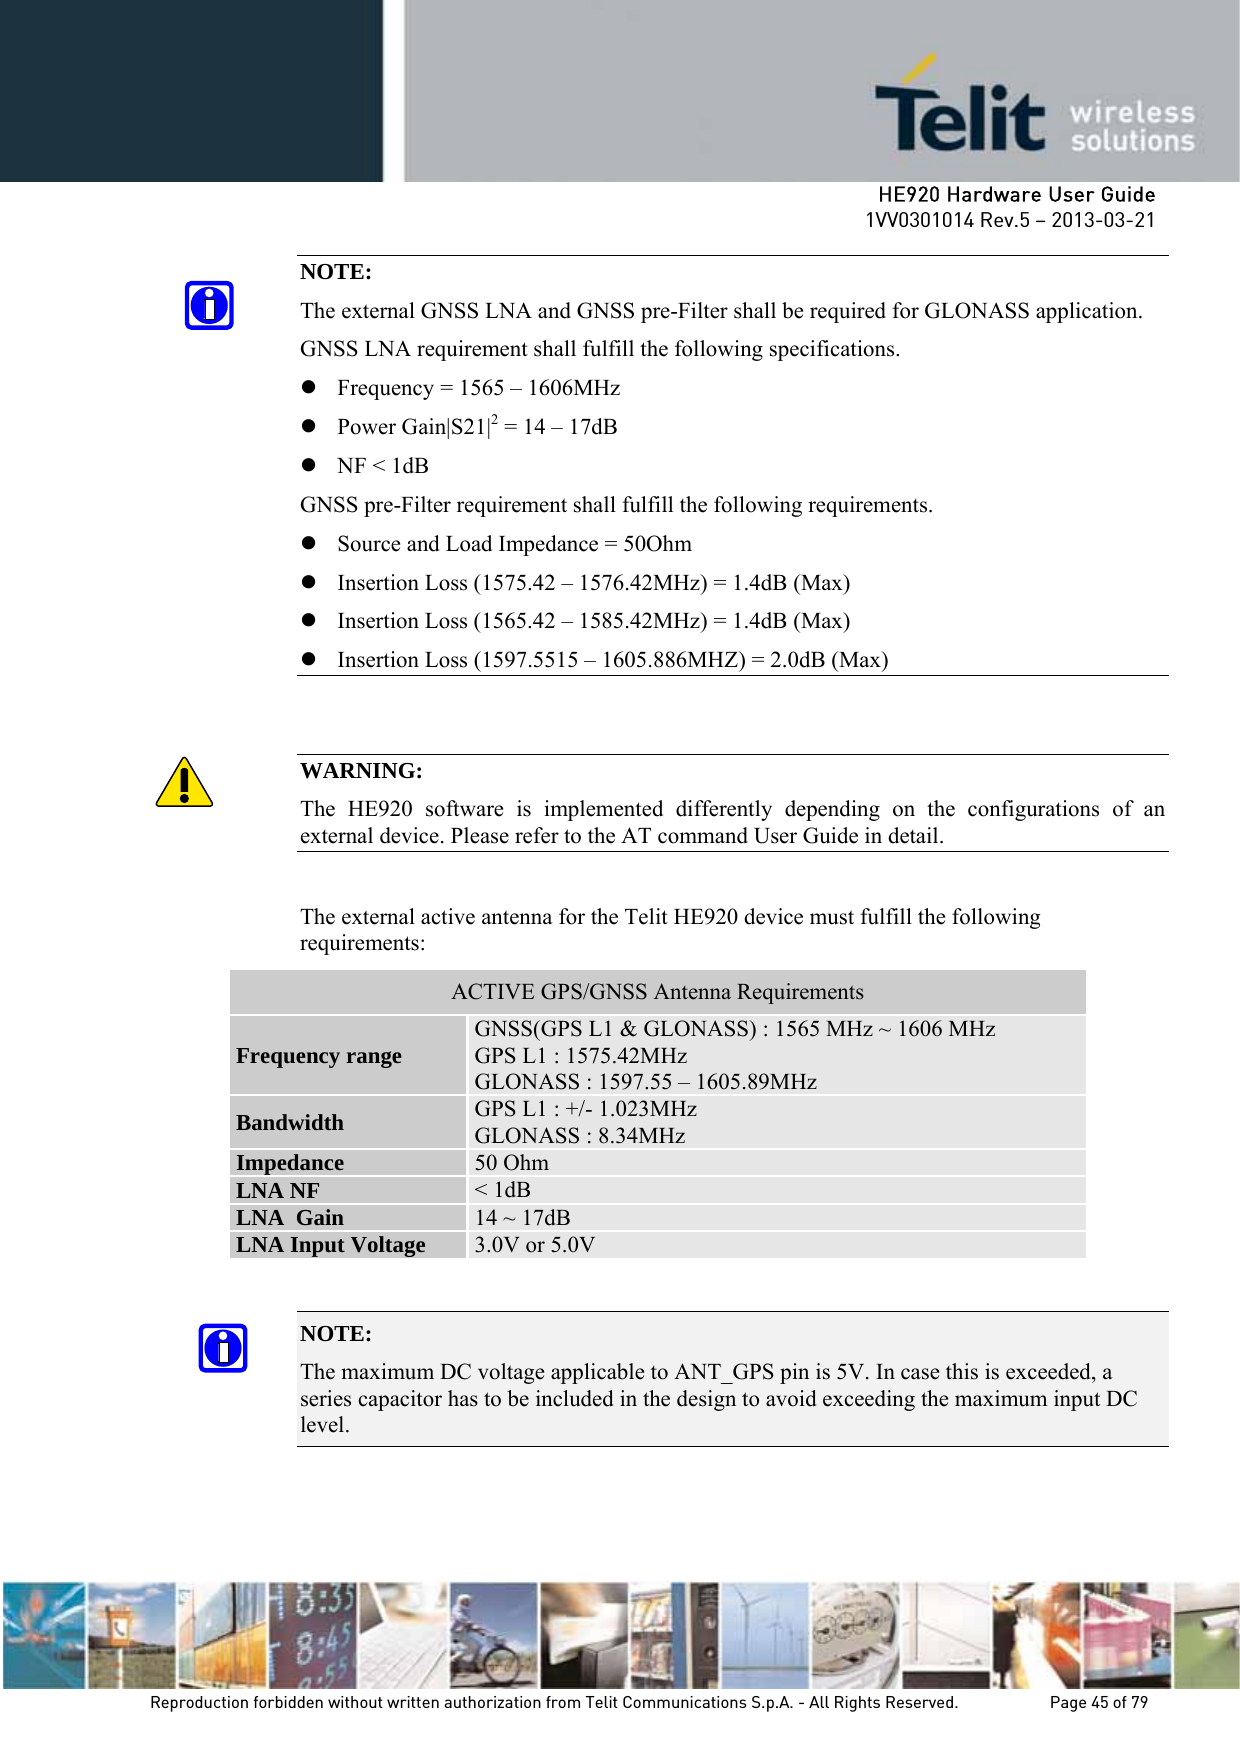     HE920 Hardware User Guide 1VV0301014 Rev.5 – 2013-03-21 Reproduction forbidden without written authorization from Telit Communications S.p.A. - All Rights Reserved.    Page 45 of 79  NOTE: The external GNSS LNA and GNSS pre-Filter shall be required for GLONASS application. GNSS LNA requirement shall fulfill the following specifications. z Frequency = 1565 – 1606MHz z Power Gain|S21|2 = 14 – 17dB z NF &lt; 1dB GNSS pre-Filter requirement shall fulfill the following requirements. z Source and Load Impedance = 50Ohm z Insertion Loss (1575.42 – 1576.42MHz) = 1.4dB (Max) z Insertion Loss (1565.42 – 1585.42MHz) = 1.4dB (Max) z Insertion Loss (1597.5515 – 1605.886MHZ) = 2.0dB (Max)   WARNING: The HE920 software is implemented differently depending on the configurations of an external device. Please refer to the AT command User Guide in detail.  The external active antenna for the Telit HE920 device must fulfill the following requirements: ACTIVE GPS/GNSS Antenna Requirements Frequency range  GNSS(GPS L1 &amp; GLONASS) : 1565 MHz ~ 1606 MHz GPS L1 : 1575.42MHz GLONASS : 1597.55 – 1605.89MHz Bandwidth  GPS L1 : +/- 1.023MHz GLONASS : 8.34MHz Impedance  50 Ohm LNA NF  &lt; 1dB LNA  Gain  14 ~ 17dB LNA Input Voltage  3.0V or 5.0V  NOTE:  The maximum DC voltage applicable to ANT_GPS pin is 5V. In case this is exceeded, a series capacitor has to be included in the design to avoid exceeding the maximum input DC level.    